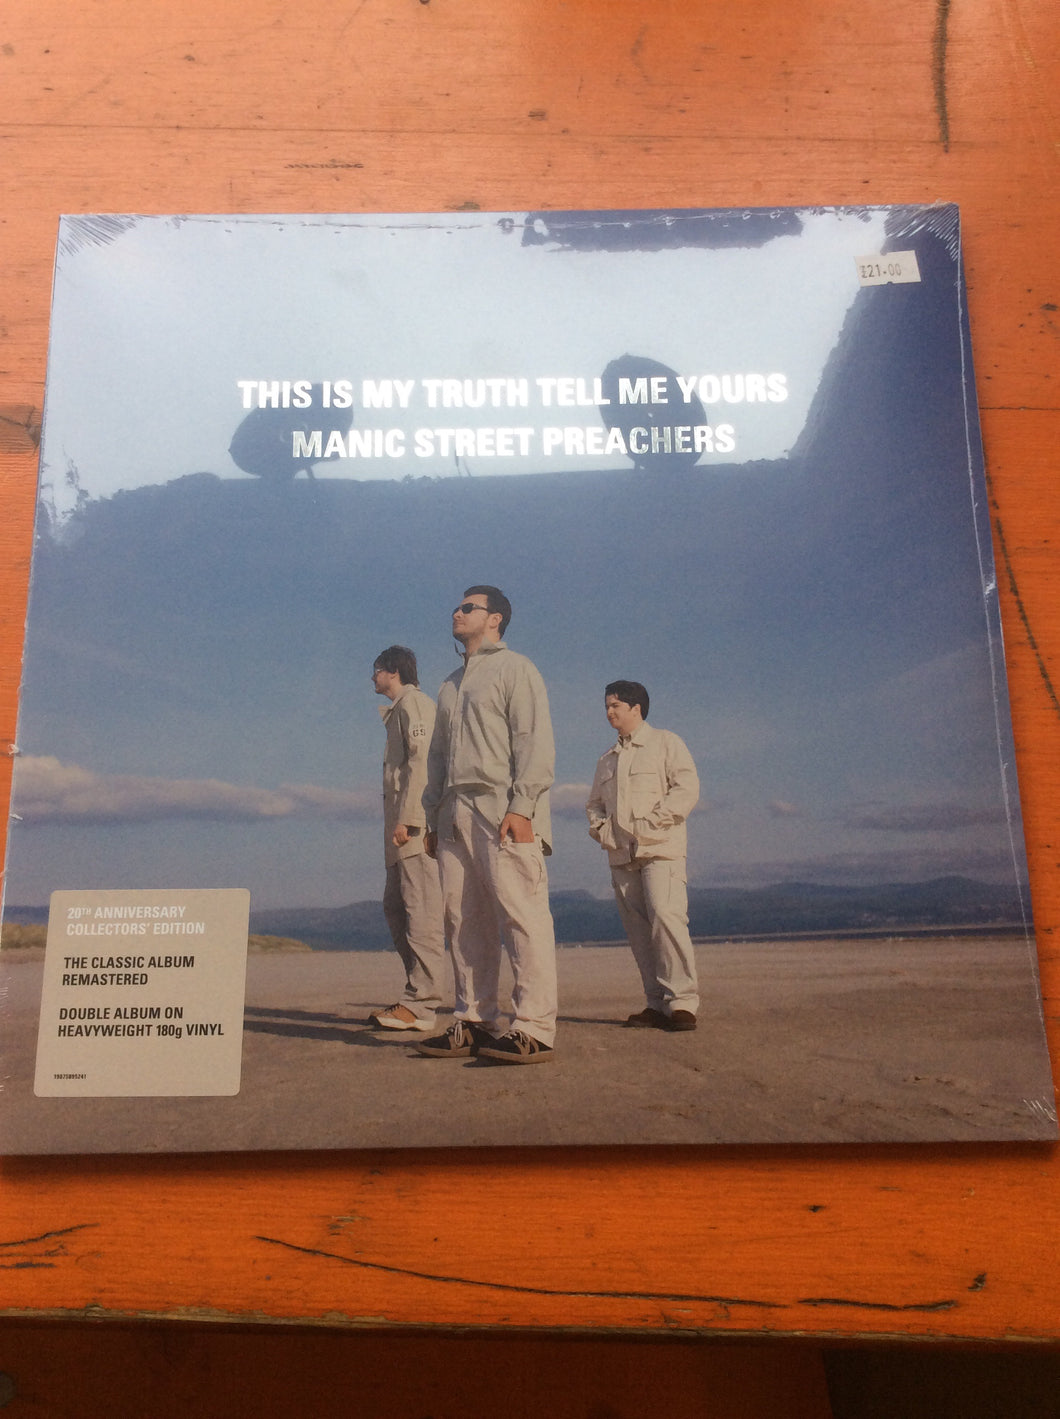 Manic Street Preachers - This Is My Truth, Tell Me Yours